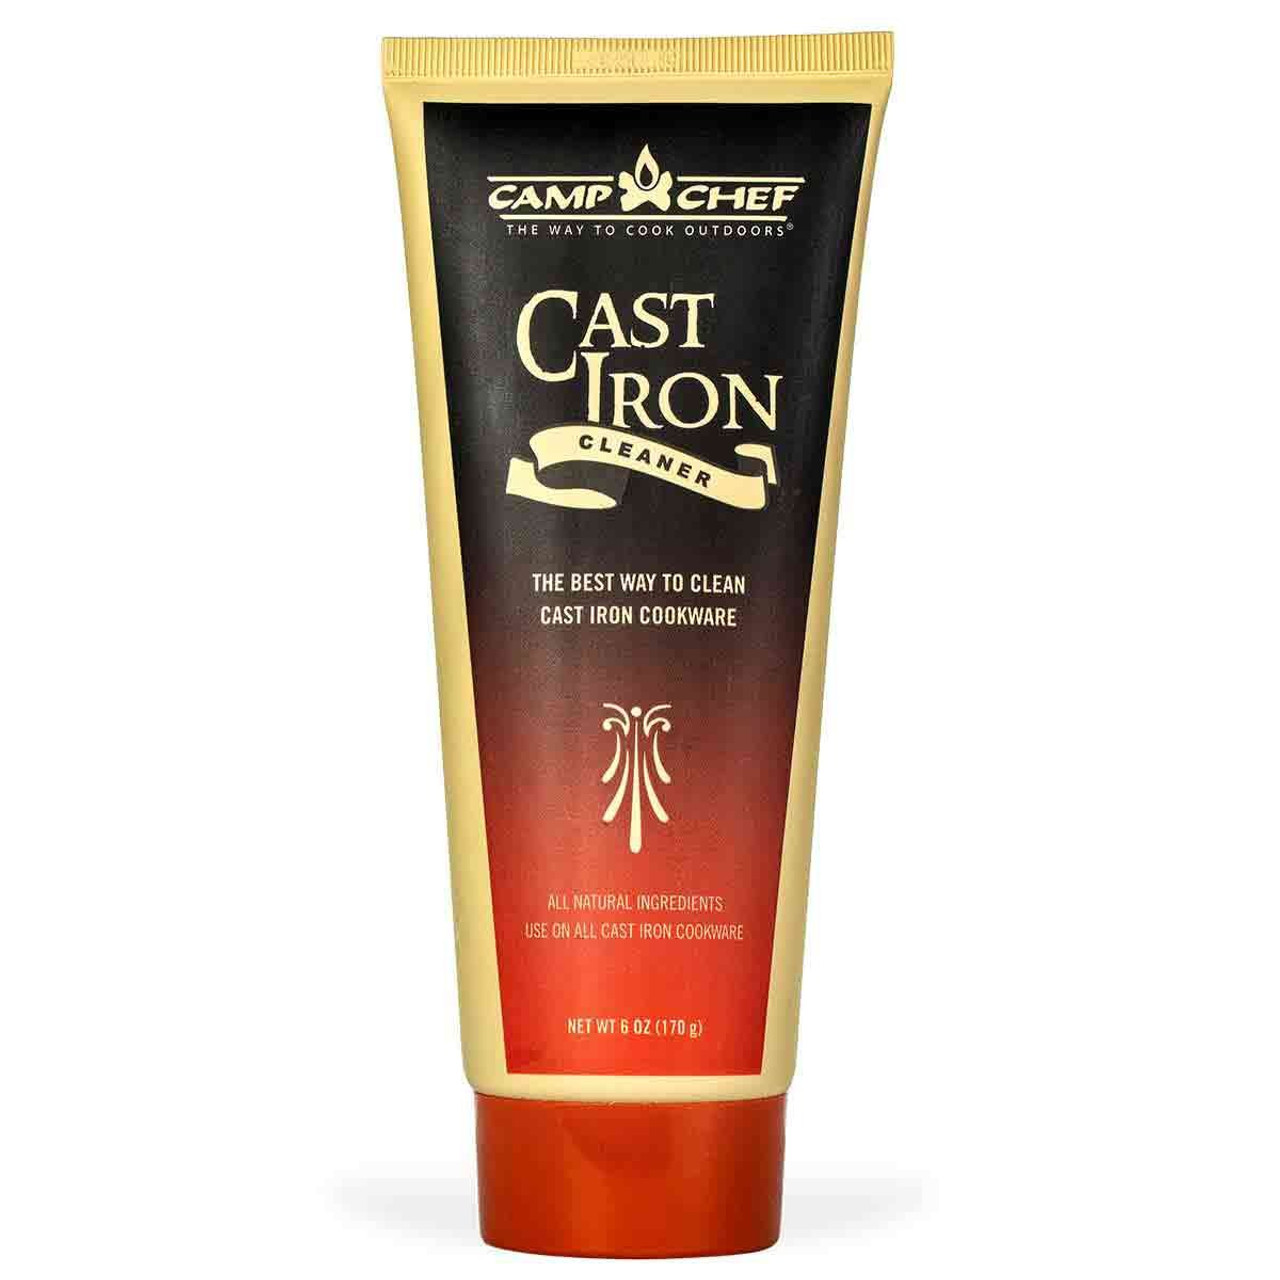 Cast Iron Conditioner  For an All-Natural Non-Stick Surface